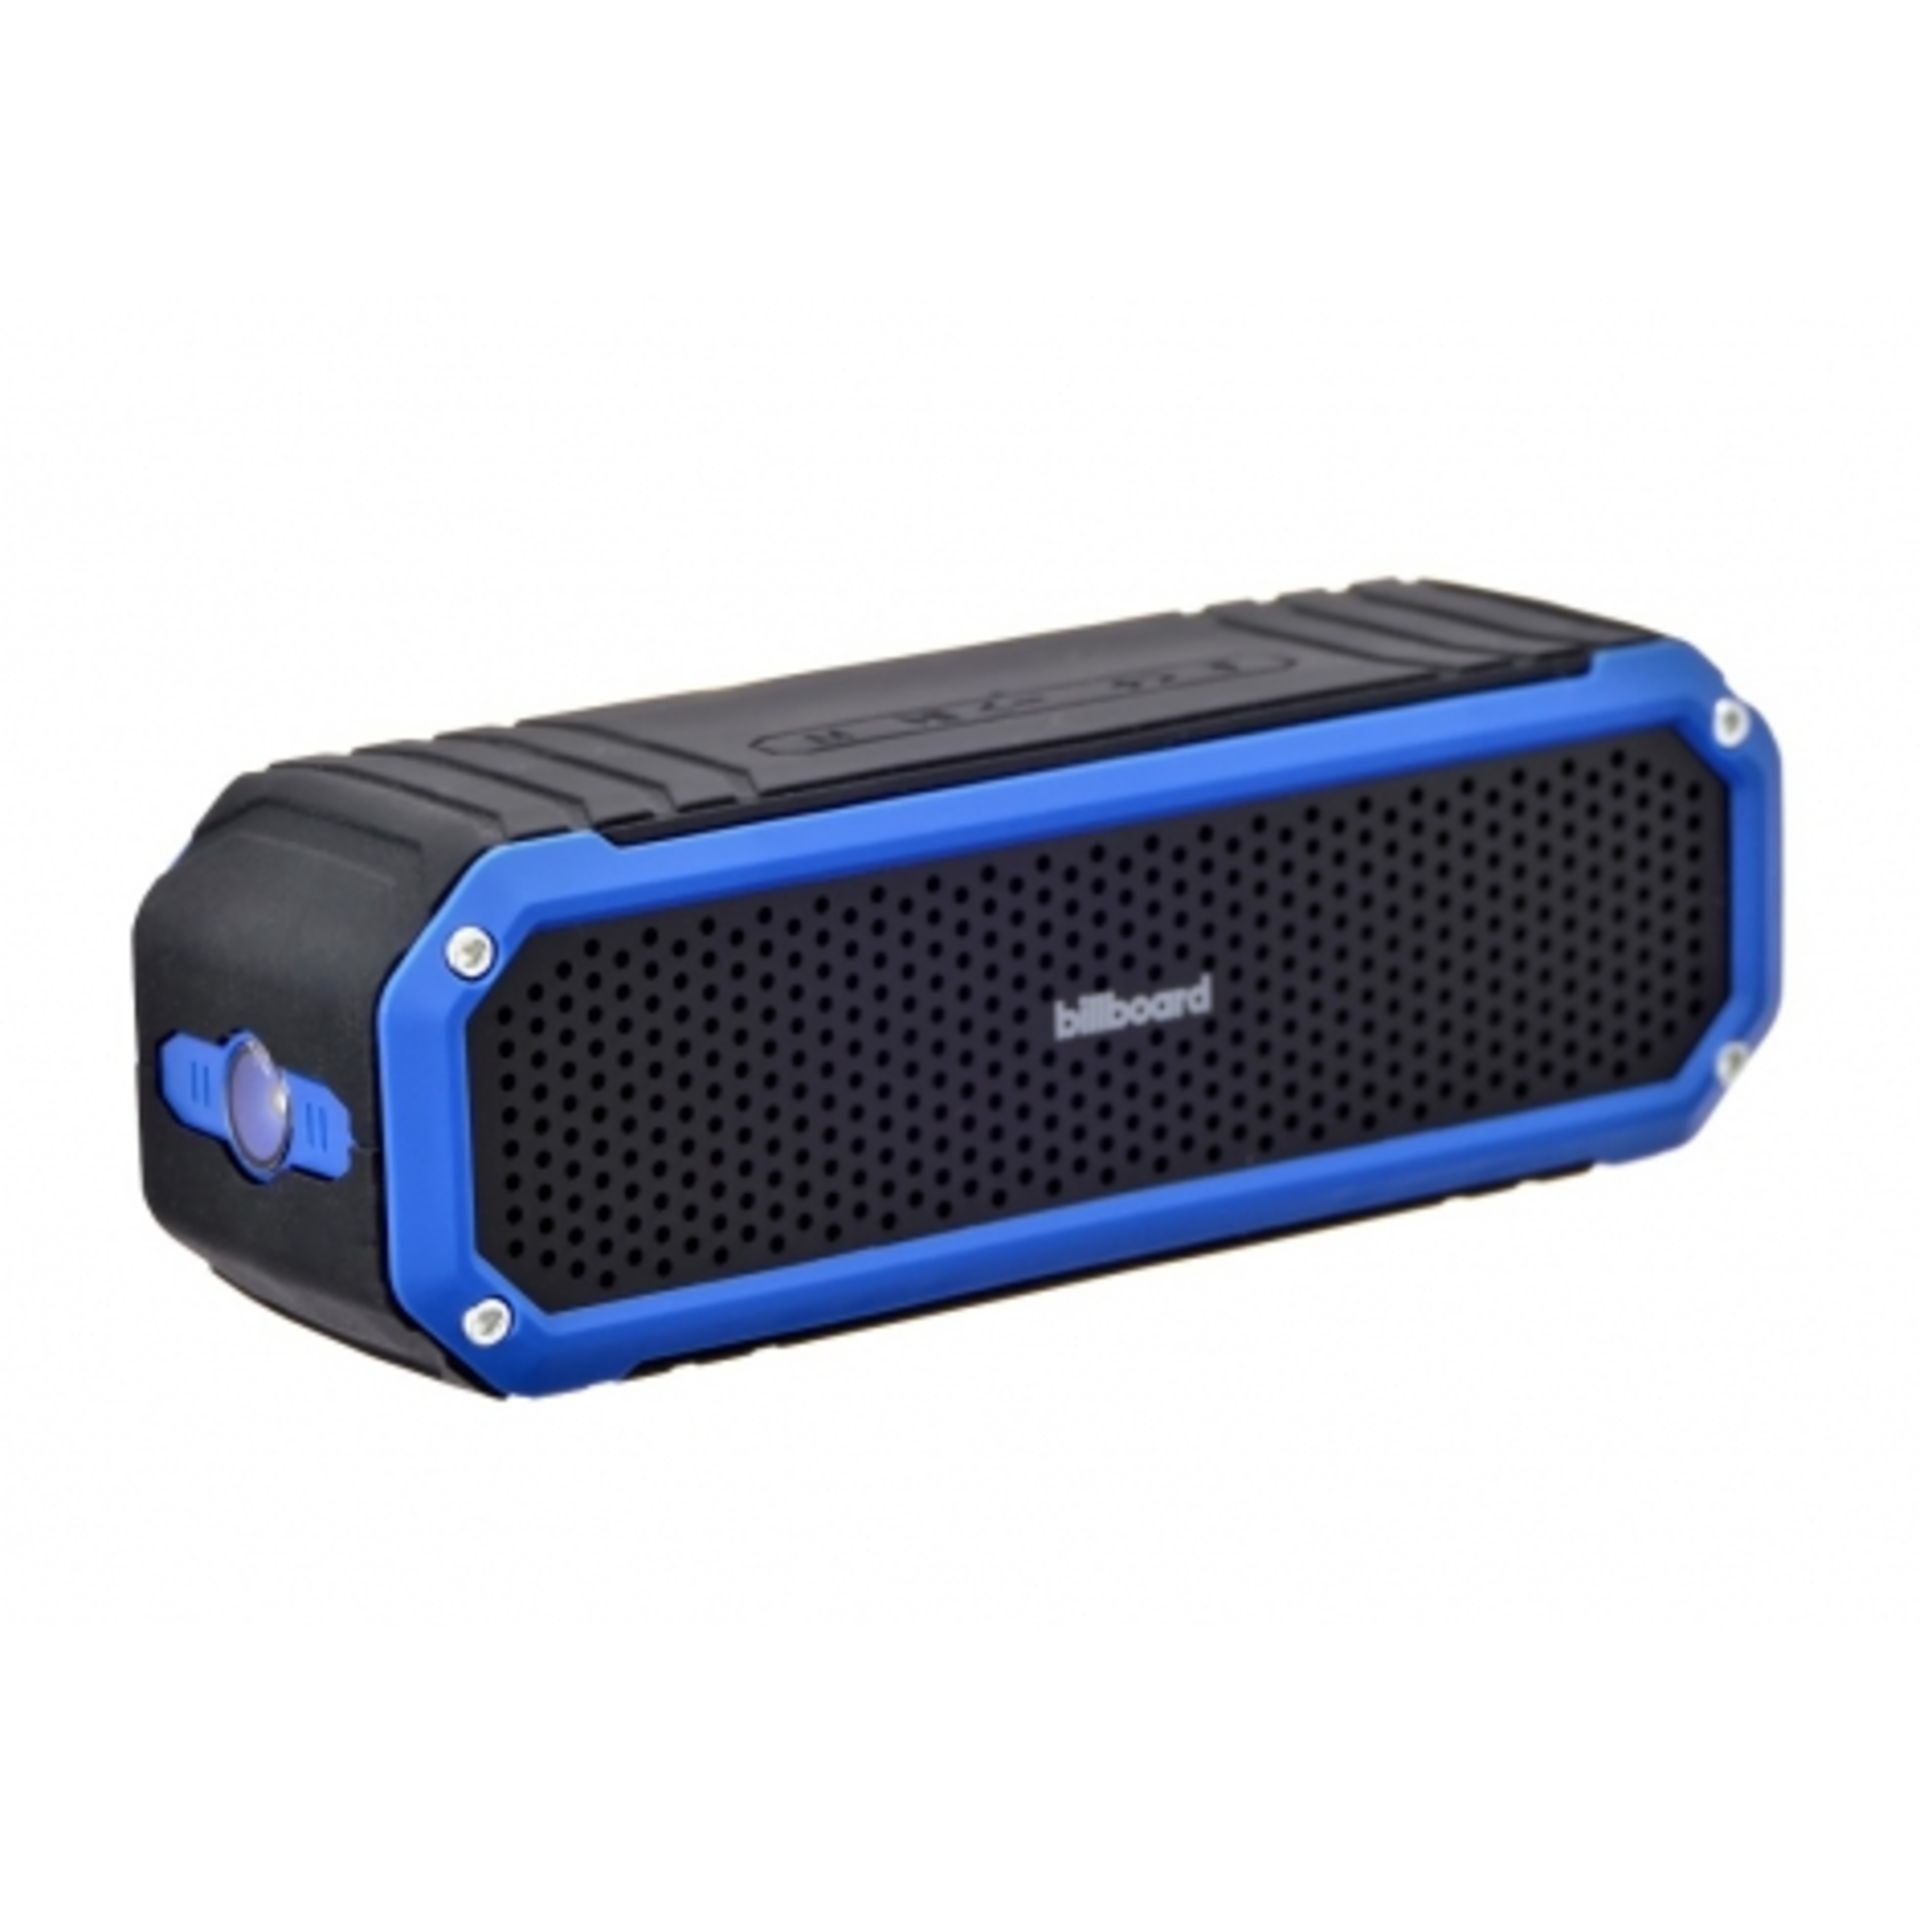 V Brand New Billboard Rugged Wireless Speaker - Soft Touch Silicon Body IPx Water Resistant Built In